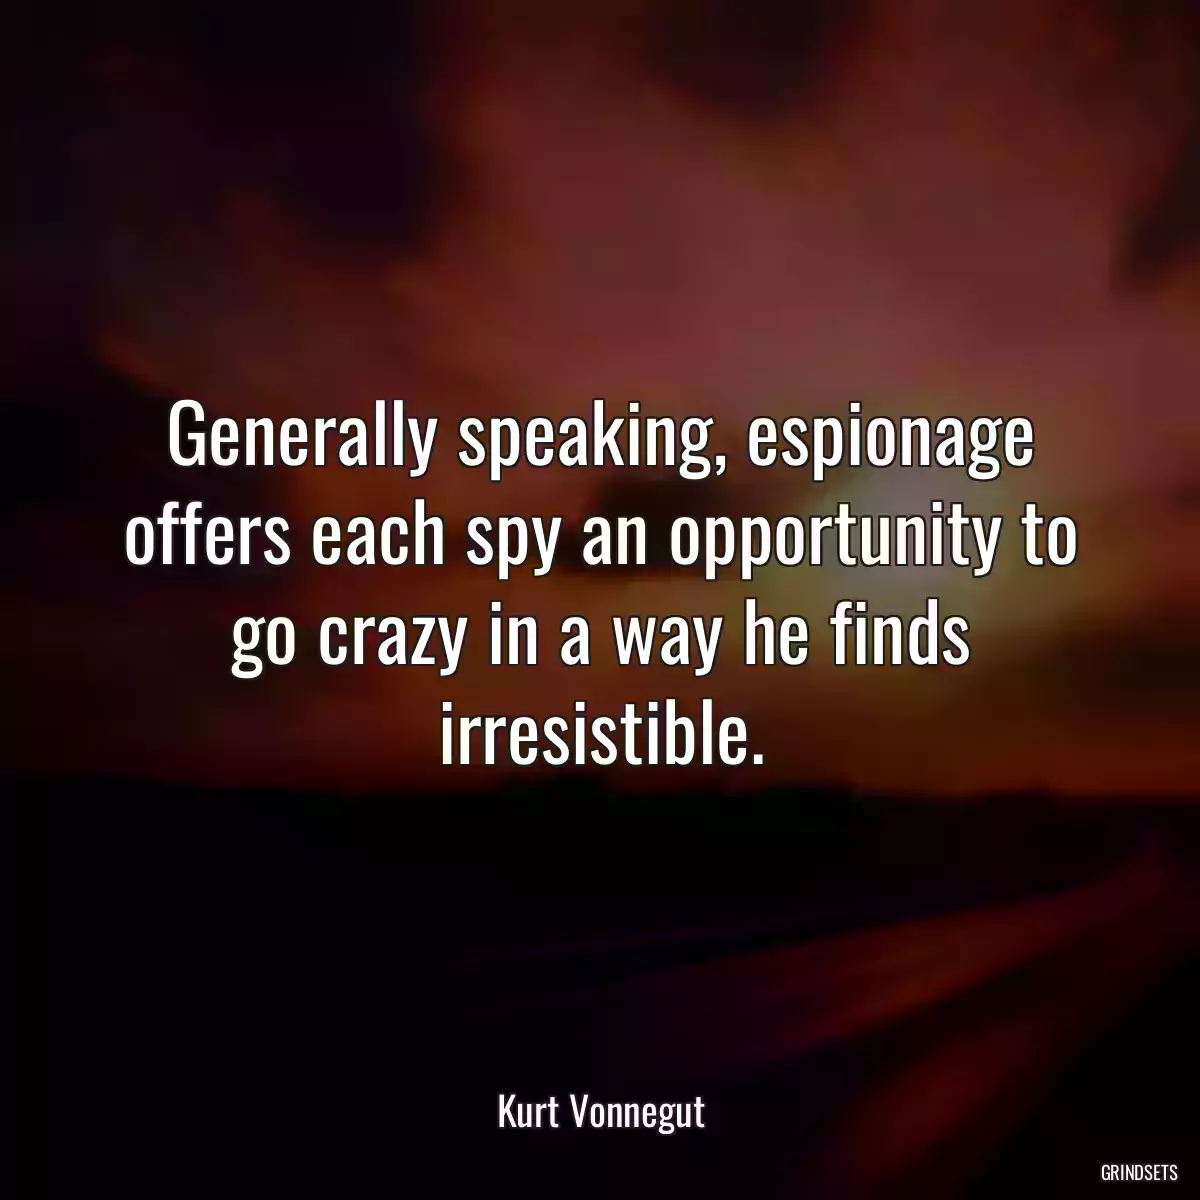 Generally speaking, espionage offers each spy an opportunity to go crazy in a way he finds irresistible.